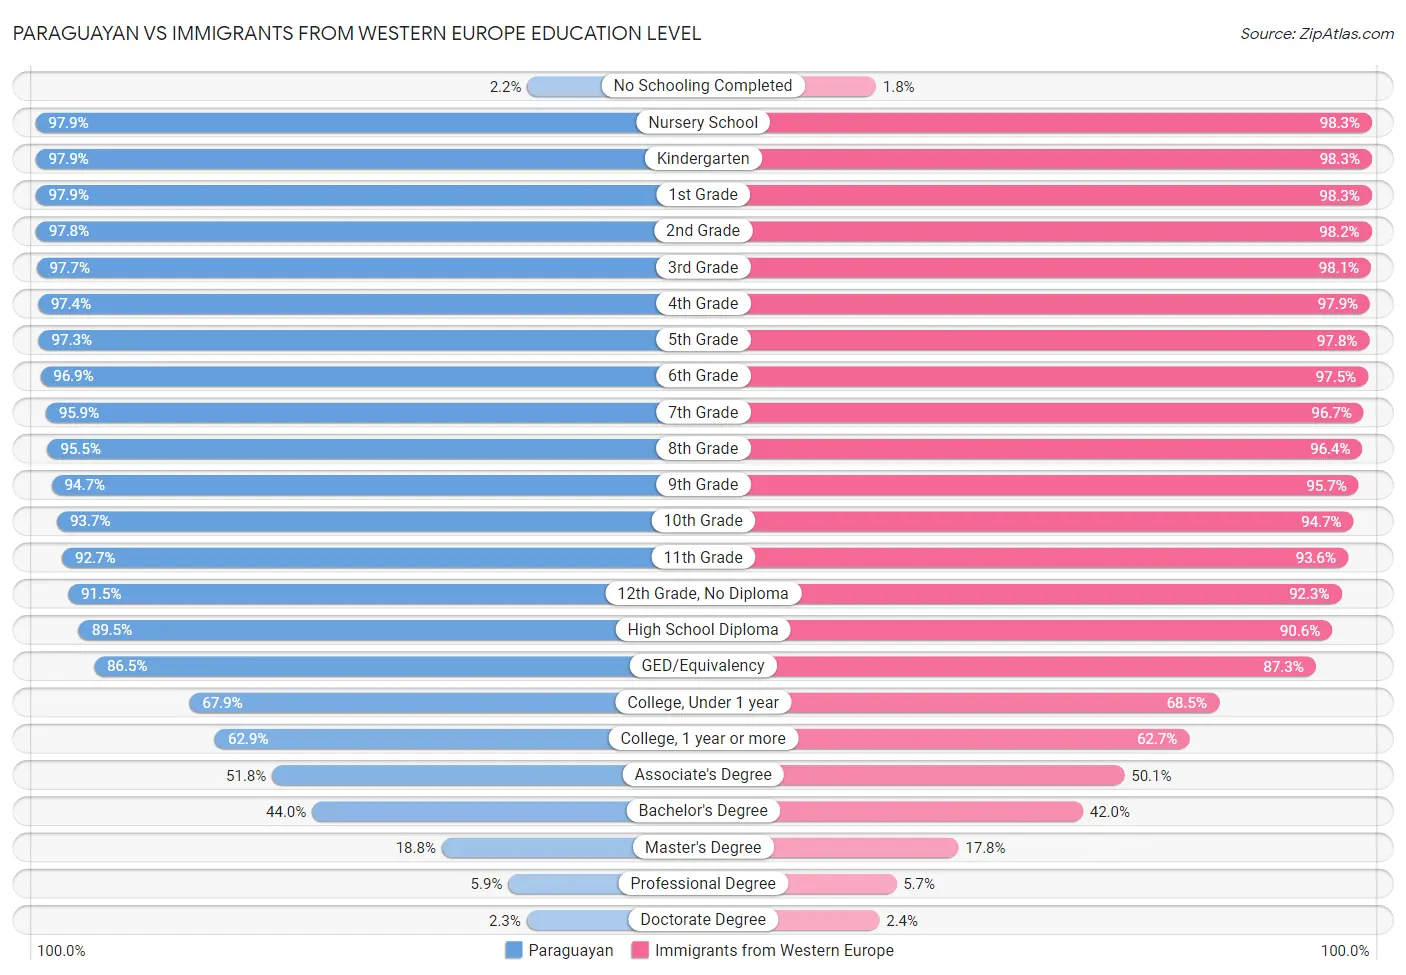 Paraguayan vs Immigrants from Western Europe Education Level